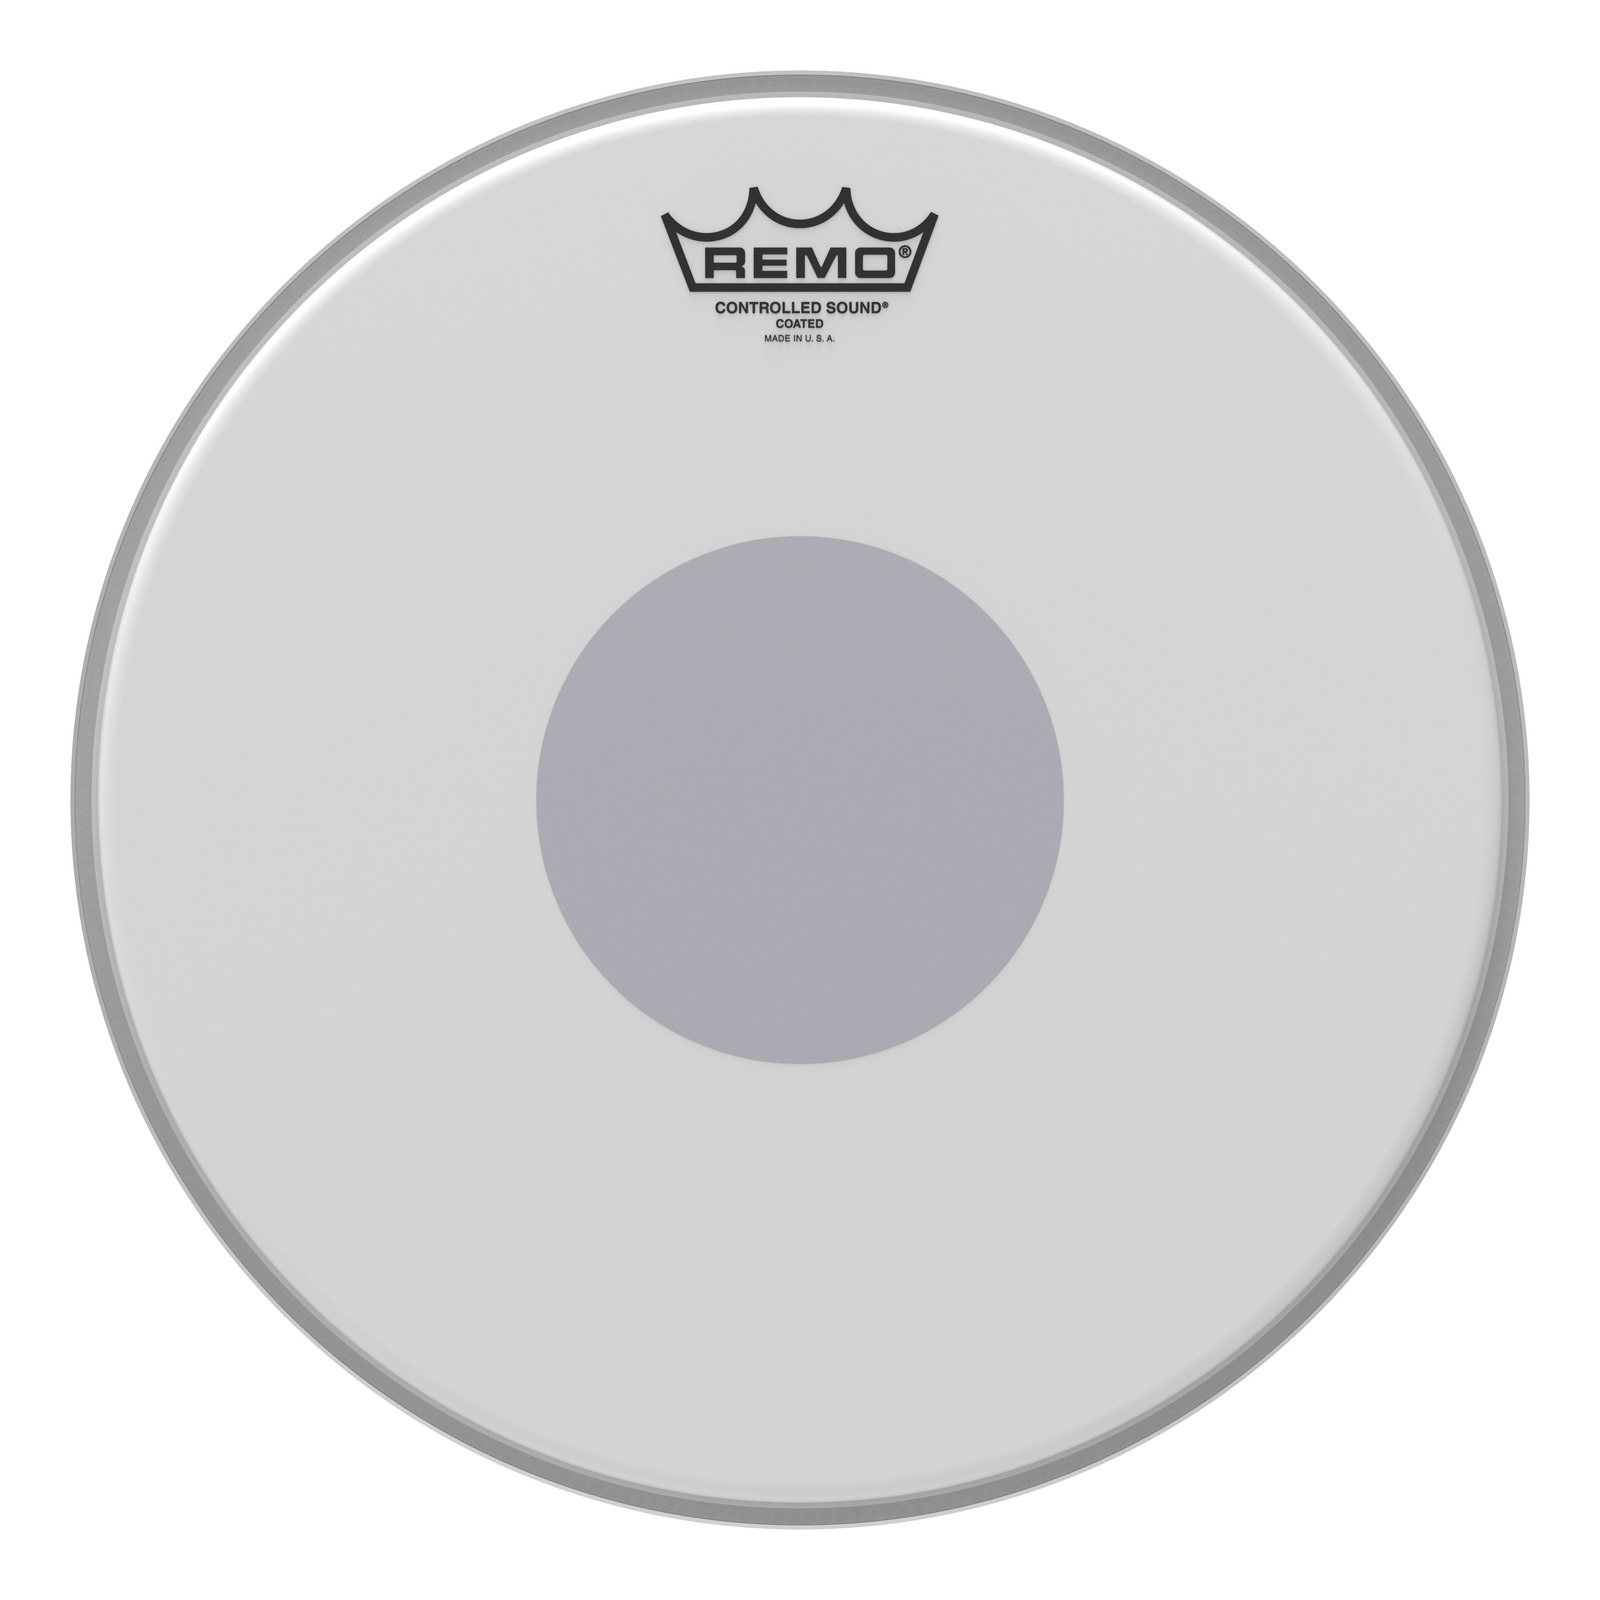 Controlled Sound® Coated Black Dot™ Drumhead - Bottom Black Dot™, 13"